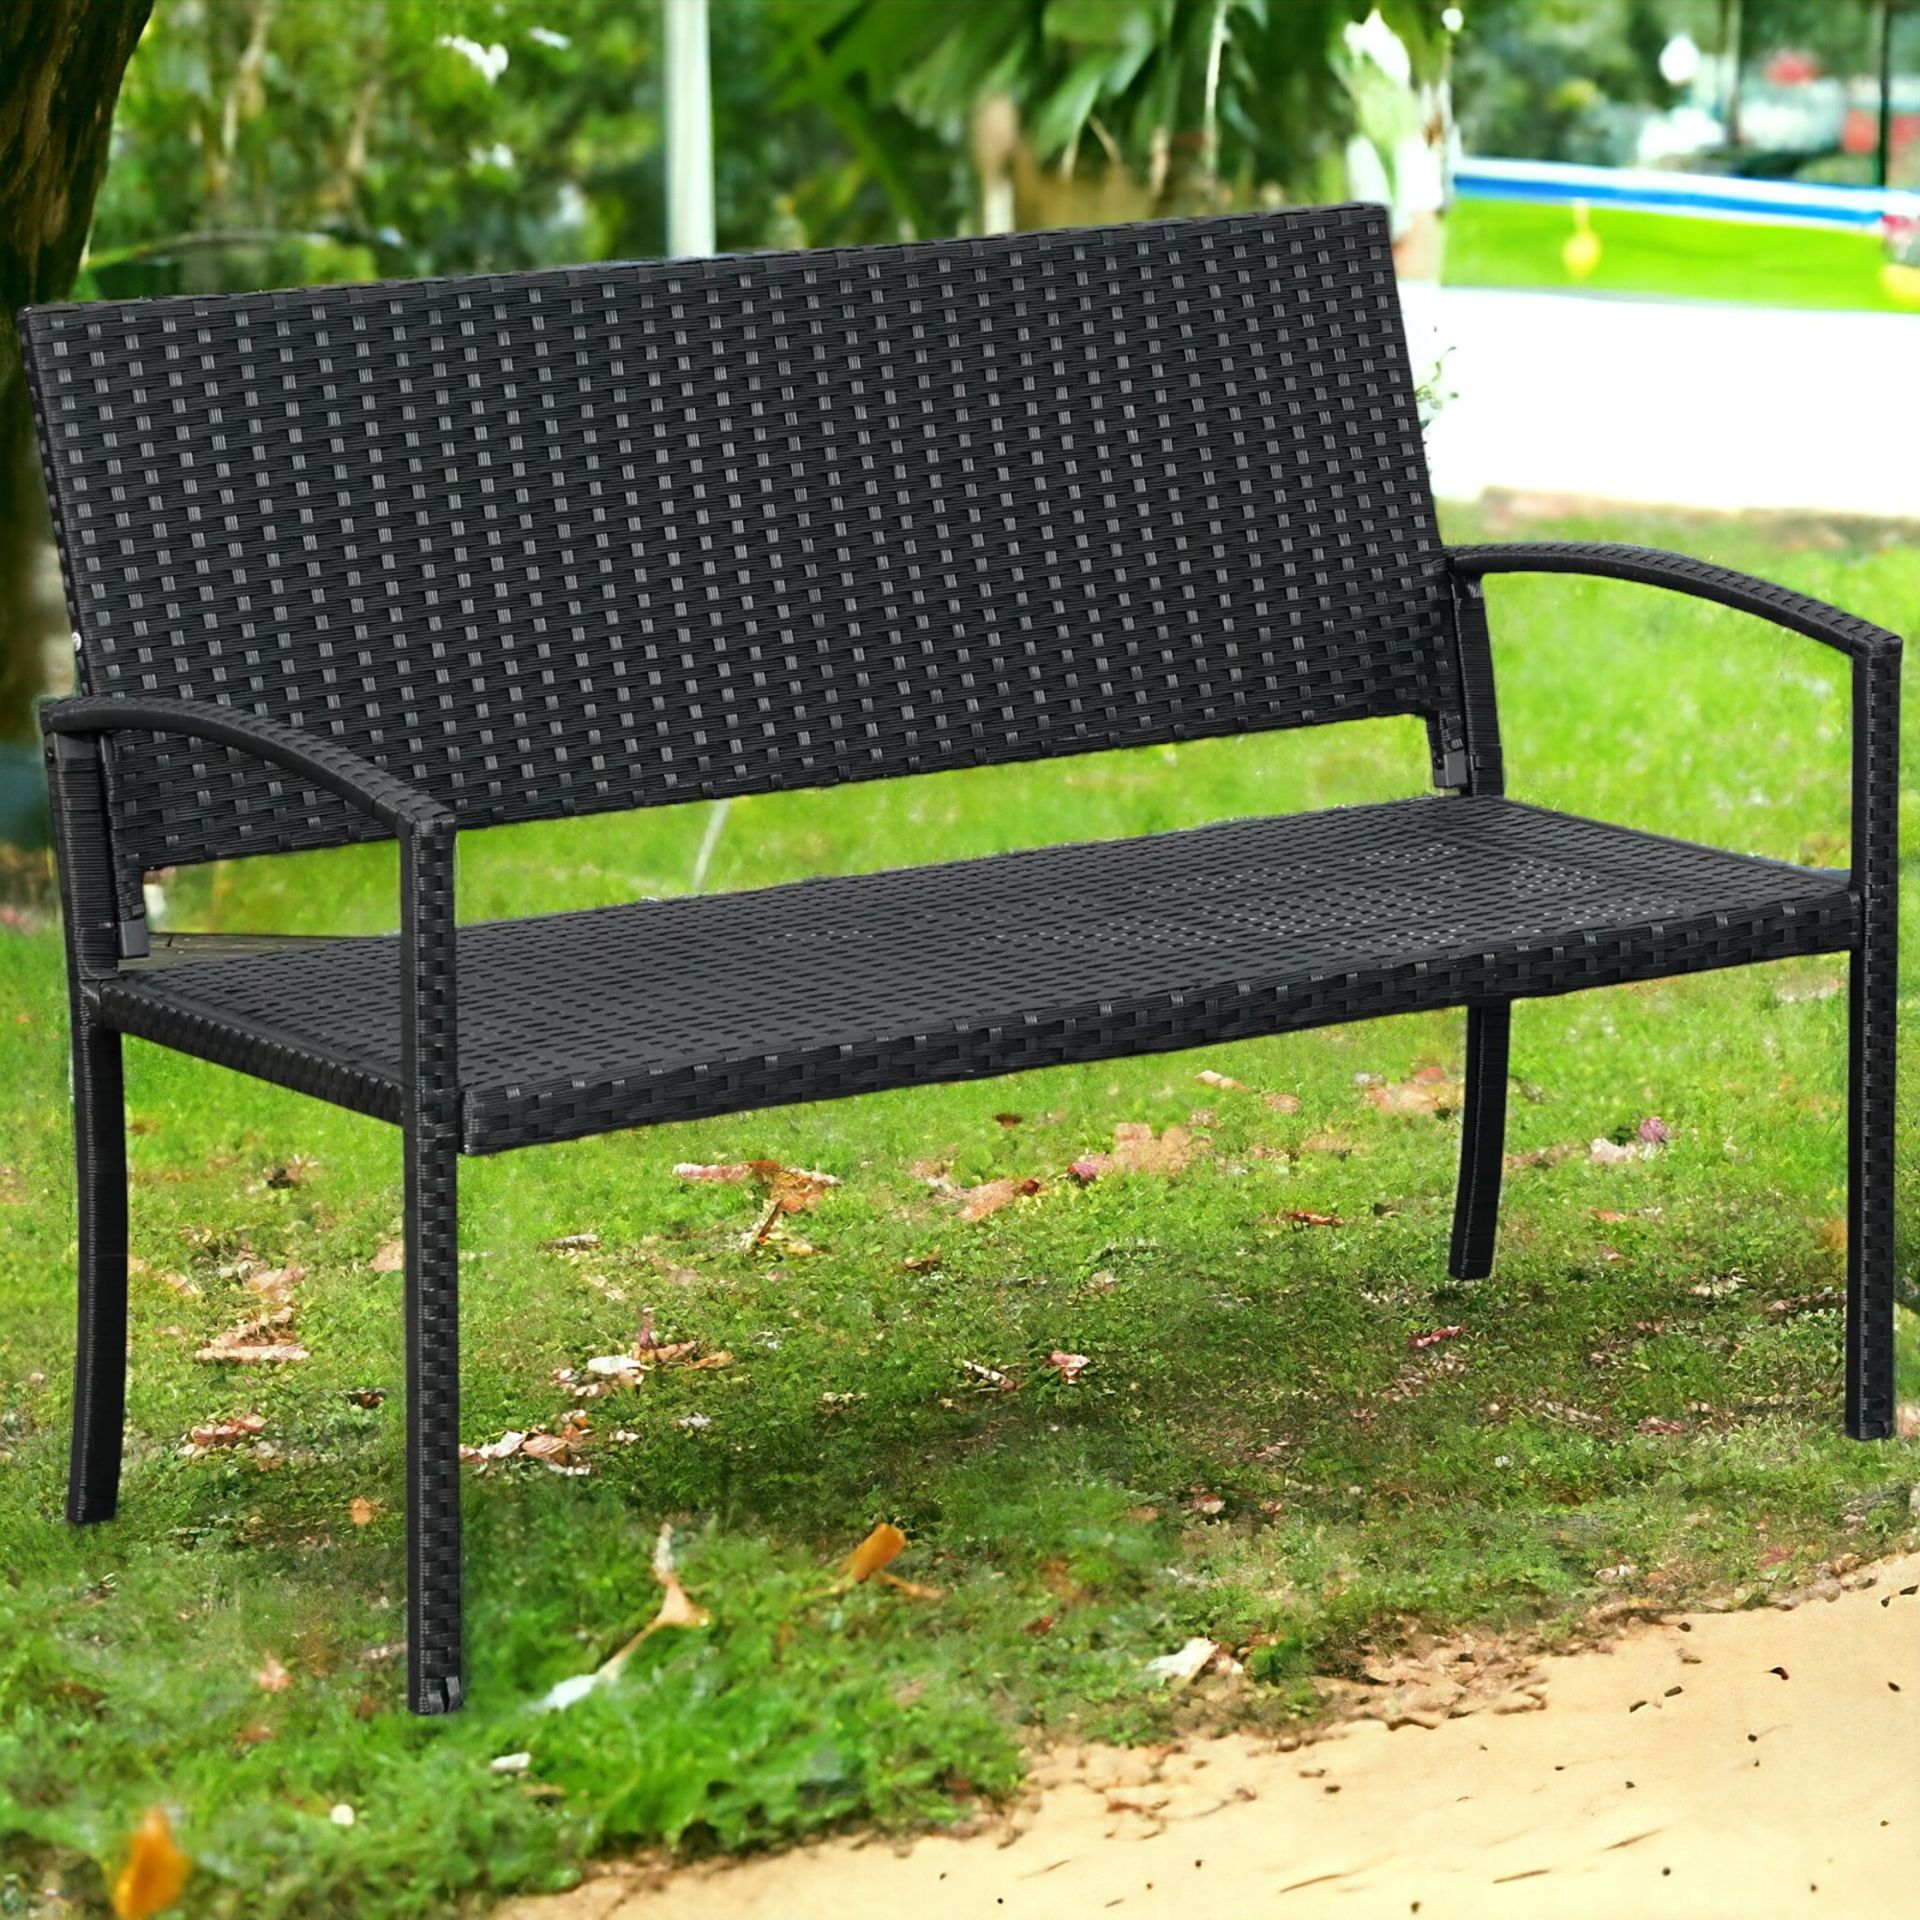 FREE DELIVERY- STYLISH PATIO RATTAN 2 SEATER LOVE SEAT GARDEN BENCH IN BLACK